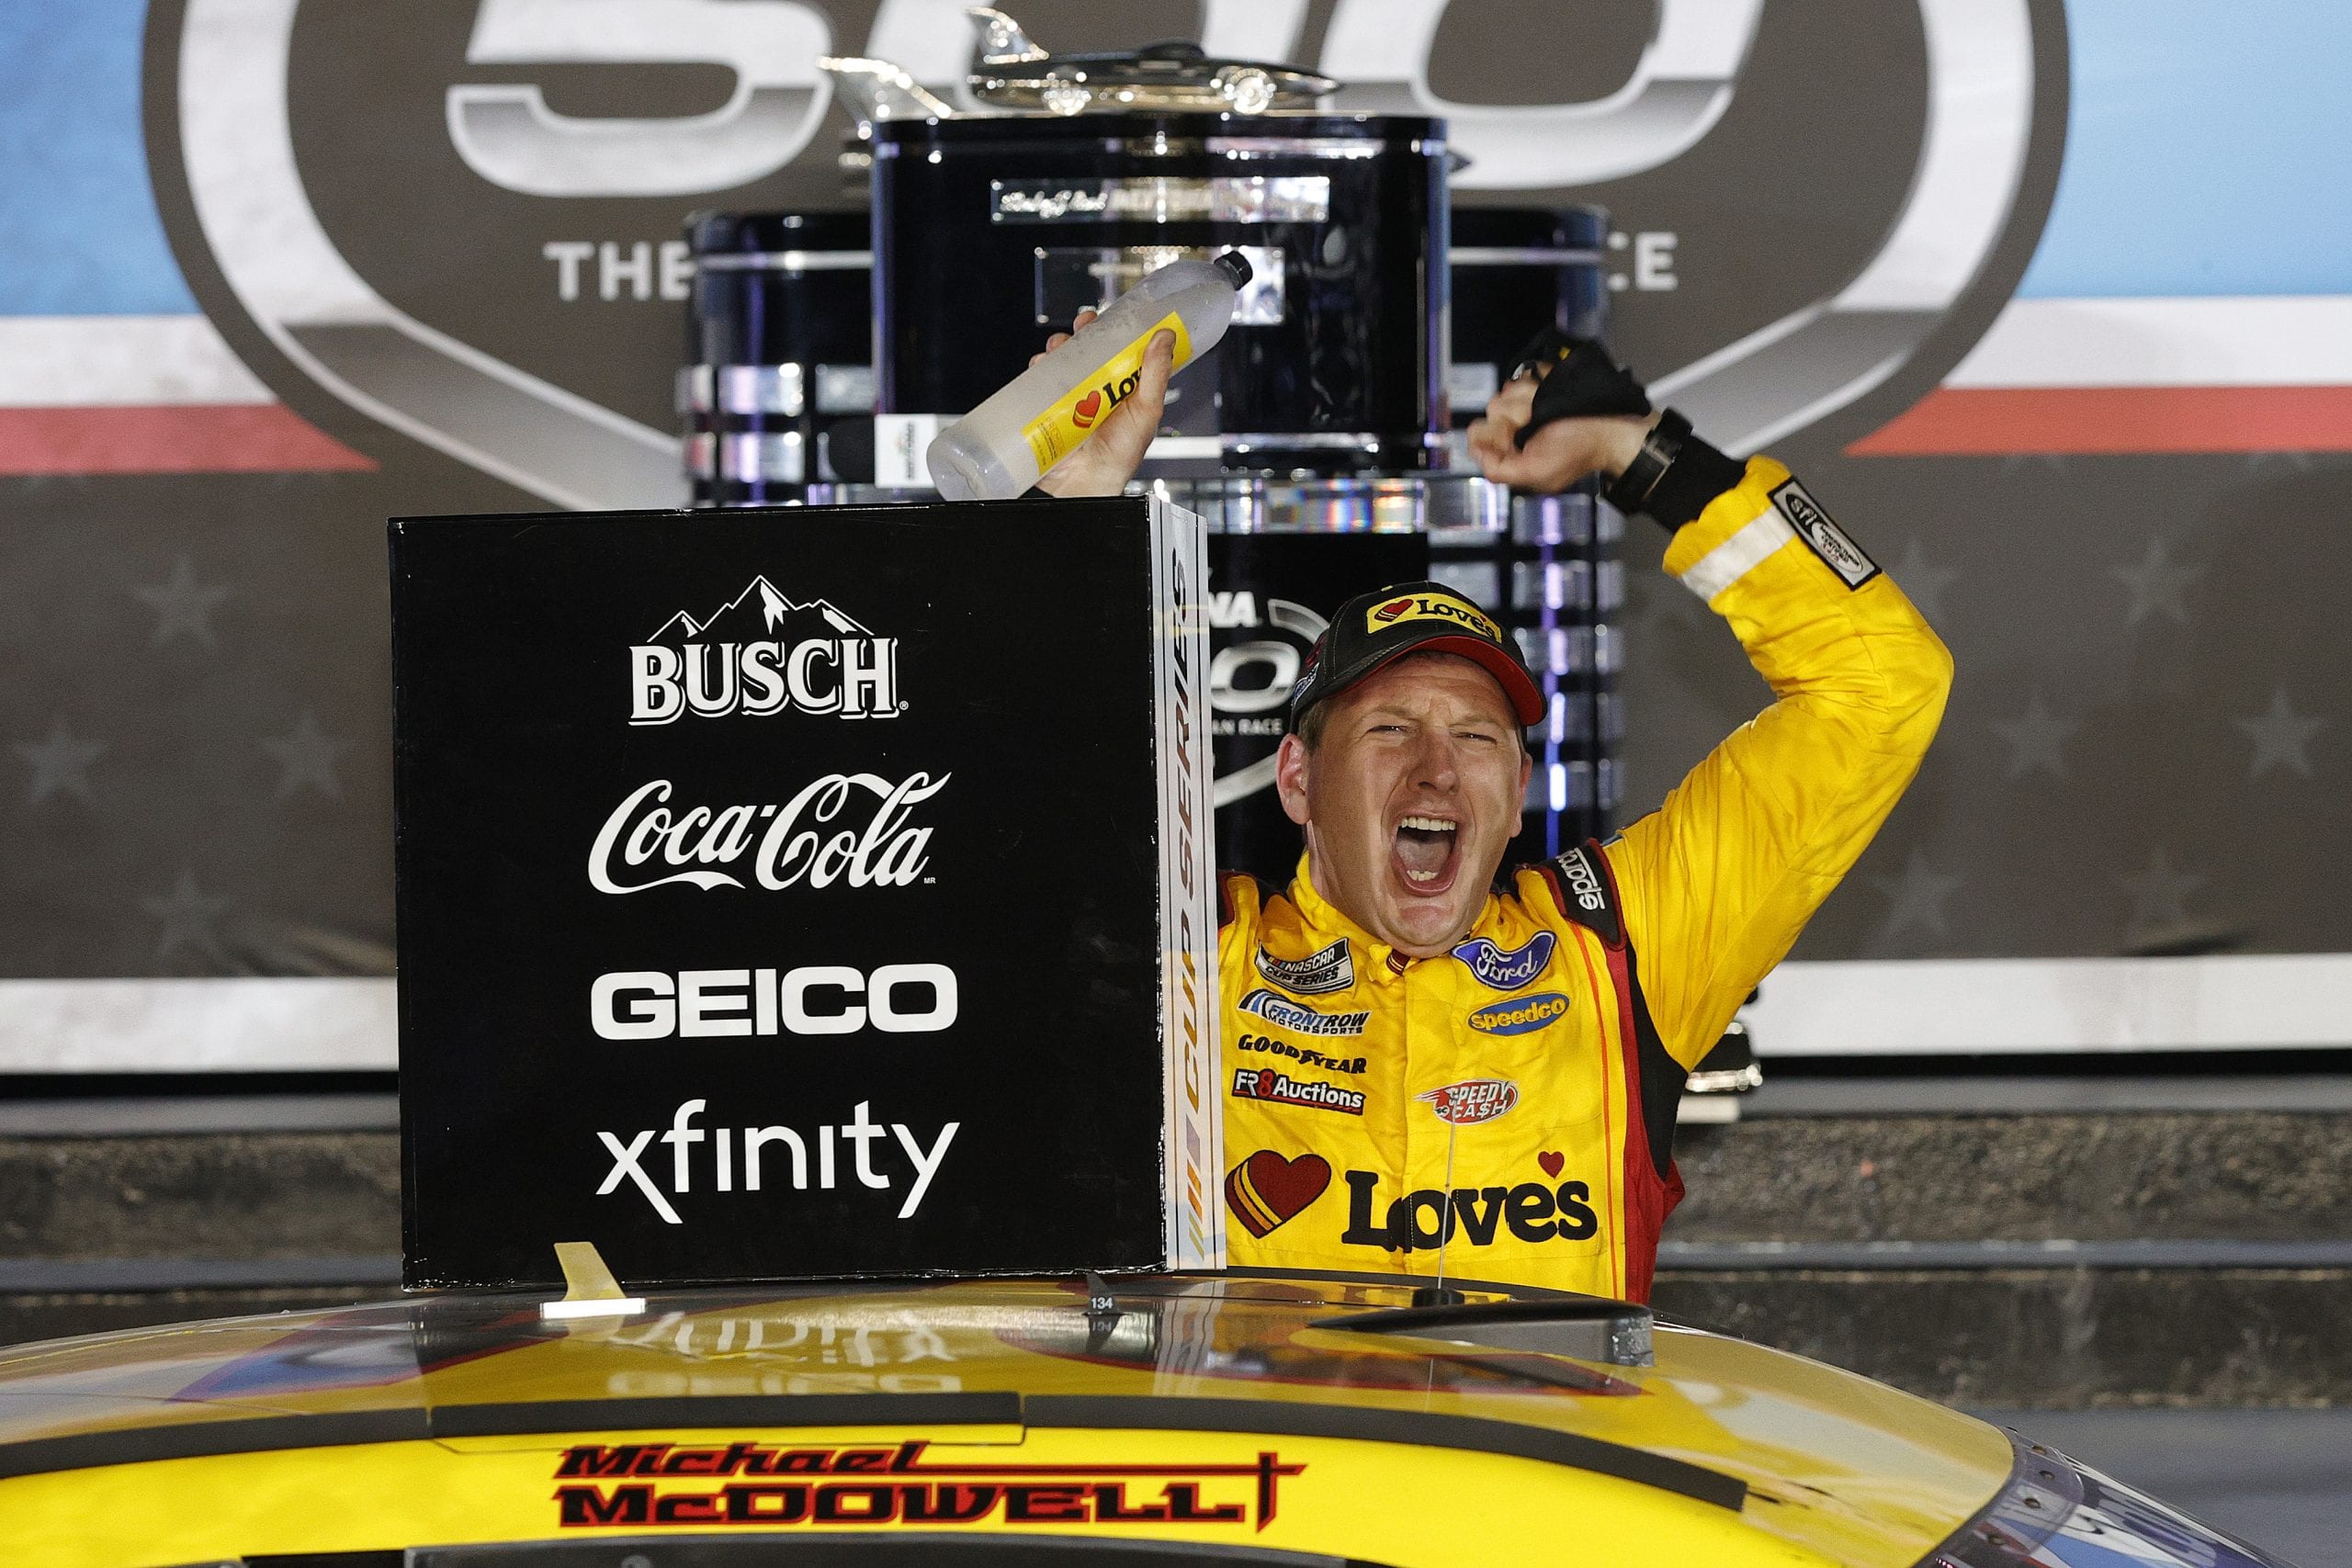 DAYTONA BEACH, FLORIDA - FEBRUARY 14: Michael McDowell, driver of the #34 Love's Travel Stops Ford, celebrates in victory lane after winning the NASCAR Cup Series 63rd Annual Daytona 500 at Daytona International Speedway on February 14, 2021 in Daytona Beach, Florida. (Photo by Chris Graythen/Getty Images) | Getty Images